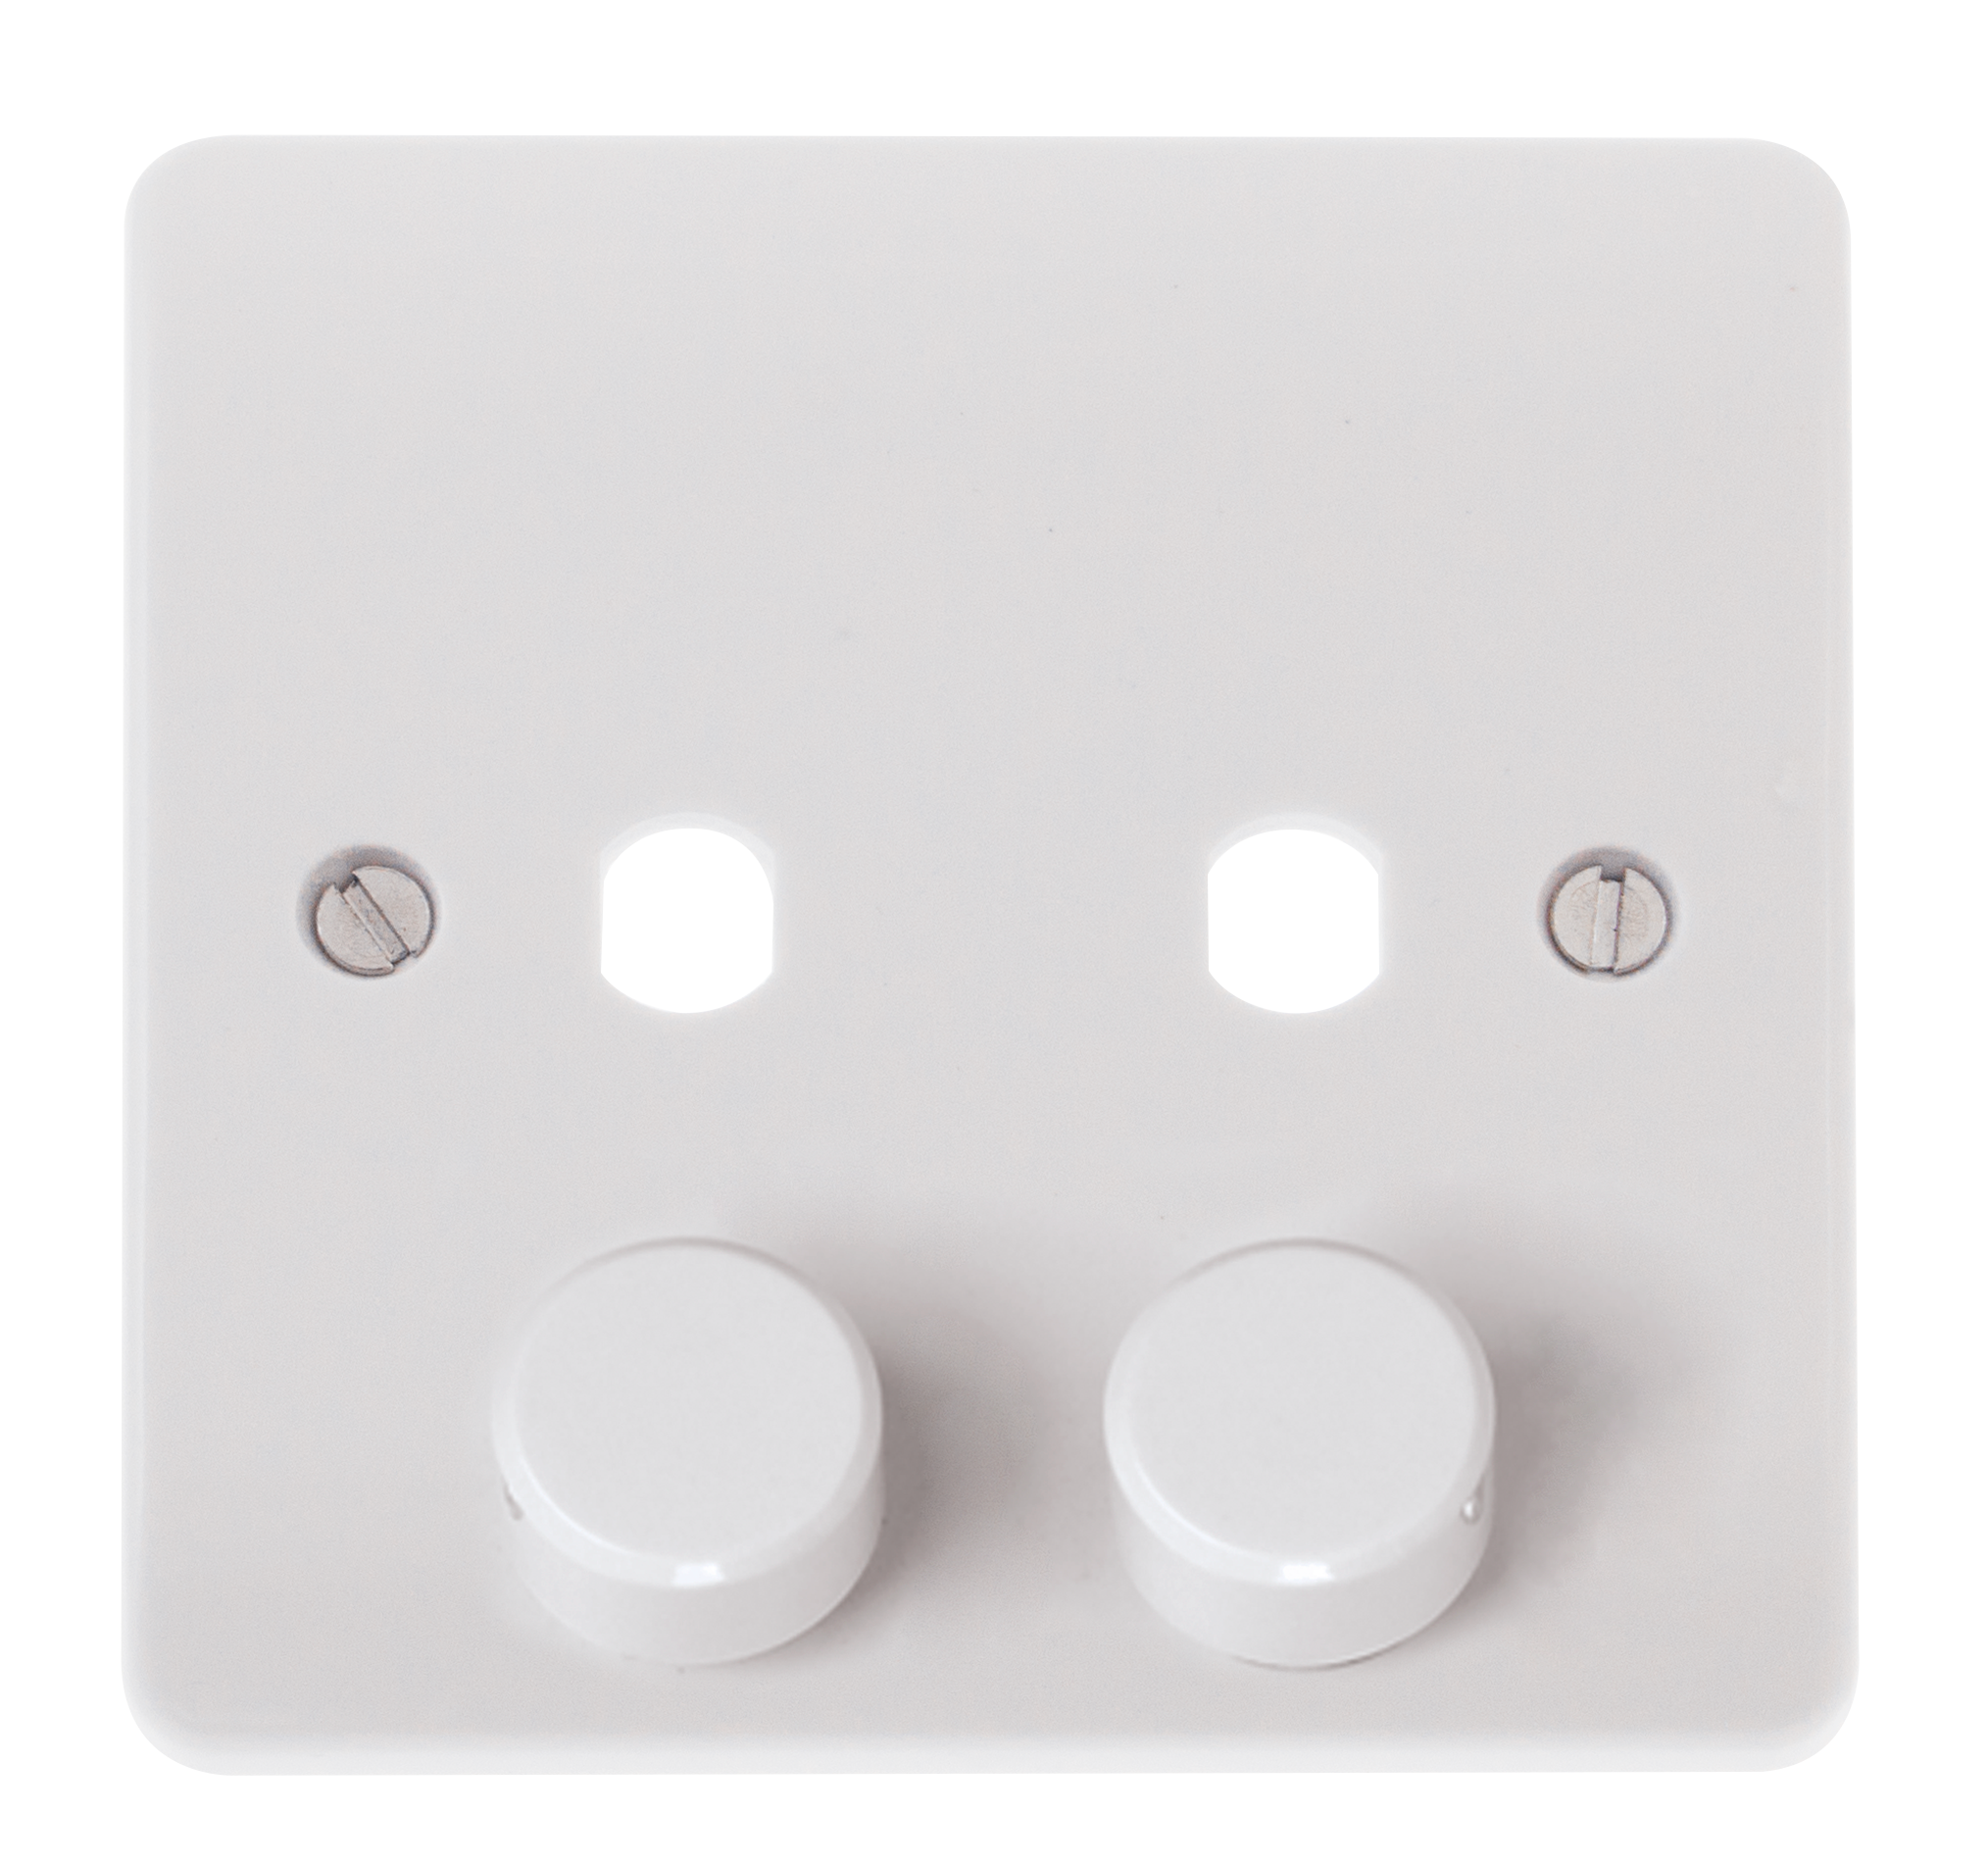 CLICK MODE MODE 2 GANG SINGLE DIMMER PLATE & KNOBS